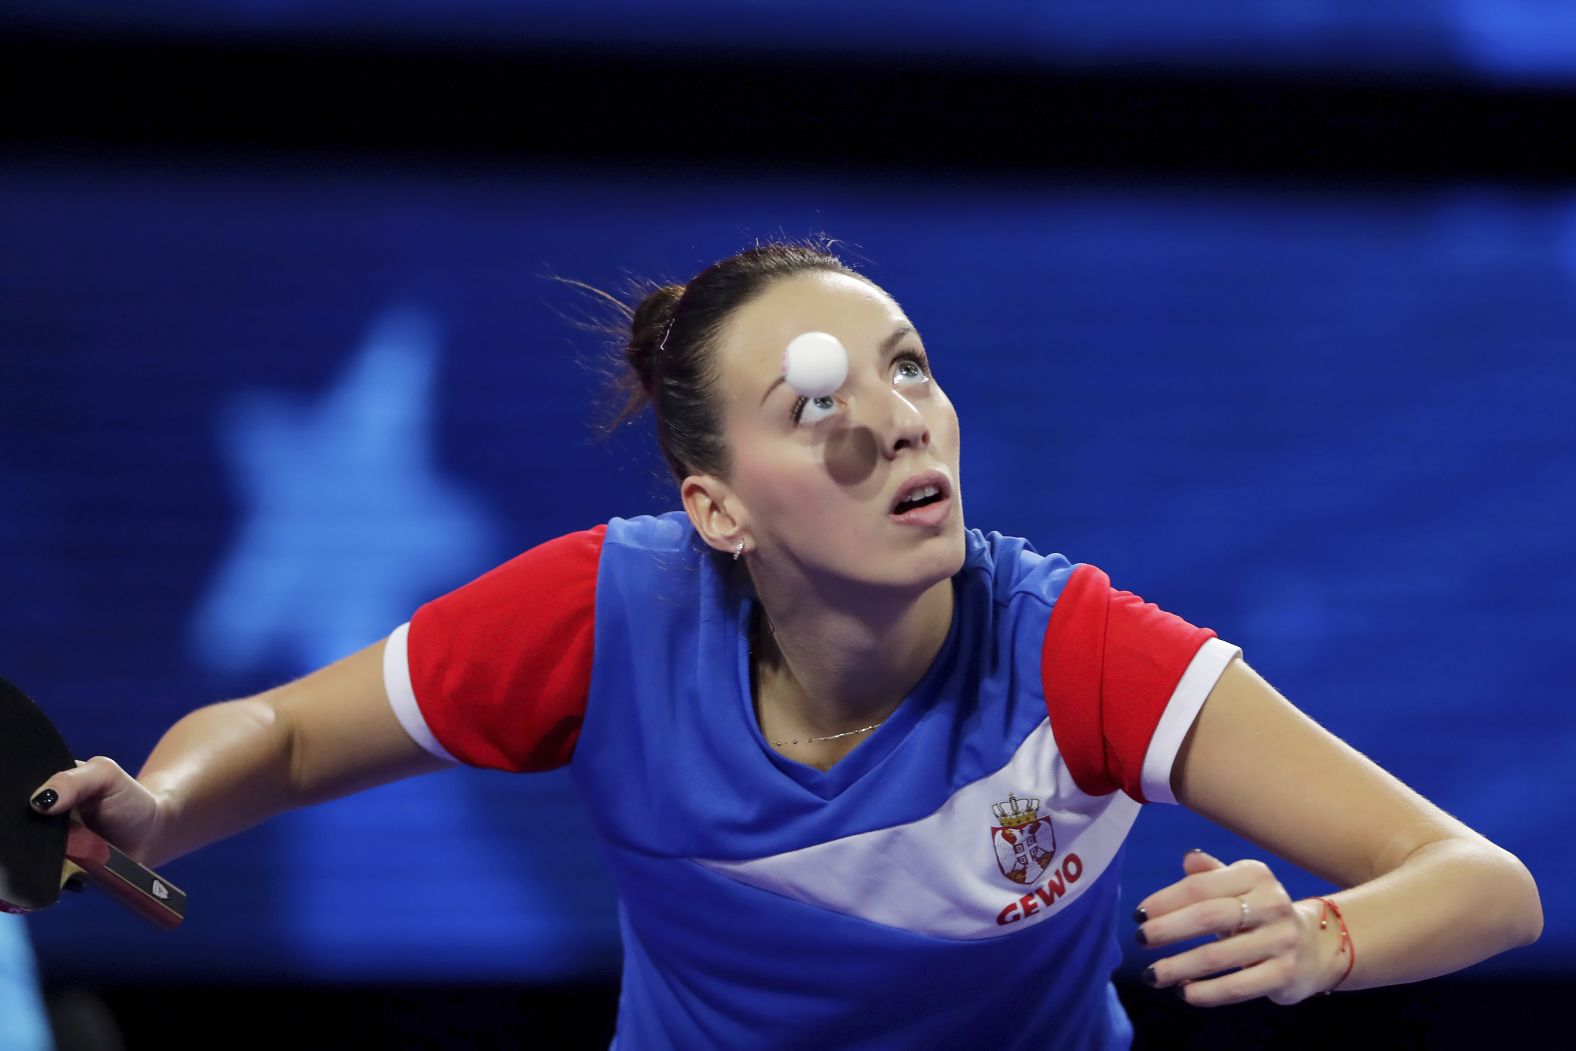 Serbia's Andrea Todorovic keeps her eye on the ball as she serves during a match at the World Table Tennis Championships on Wednesday, November 24.